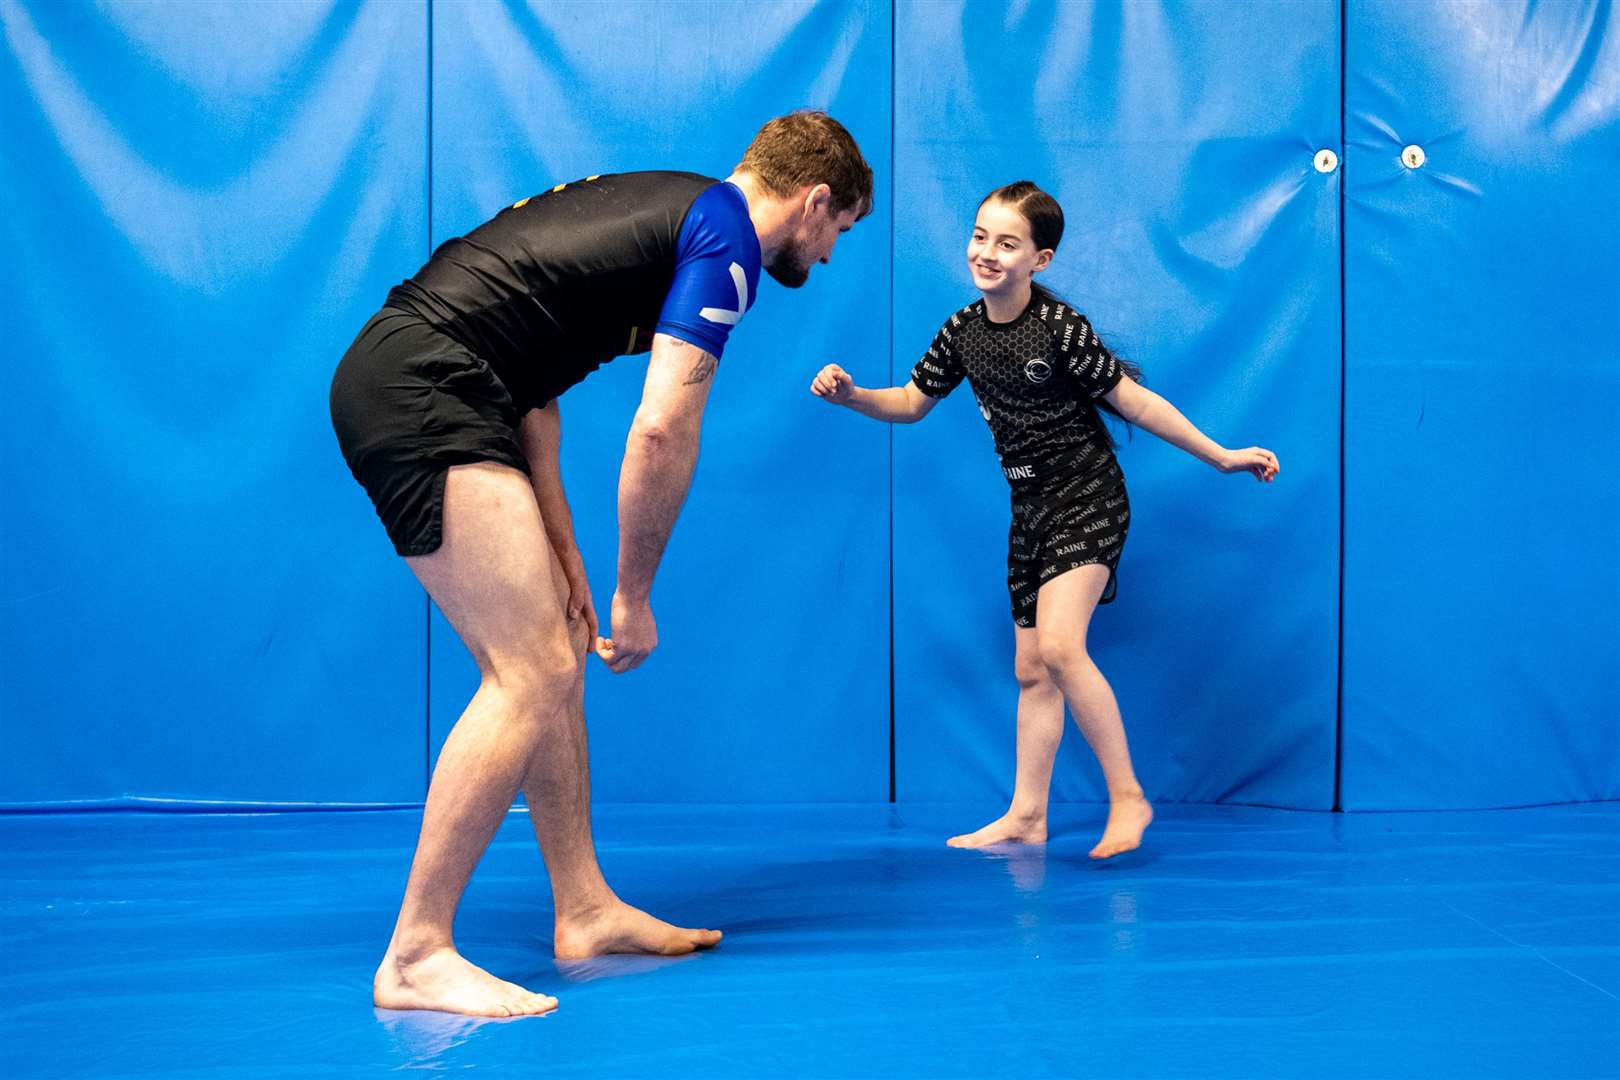 Although a fanatic of the sport, spending almost 20 hours a week training, it was the first time Niamh Ross had actually attended a MMA show. Picture: Jessica Fulton